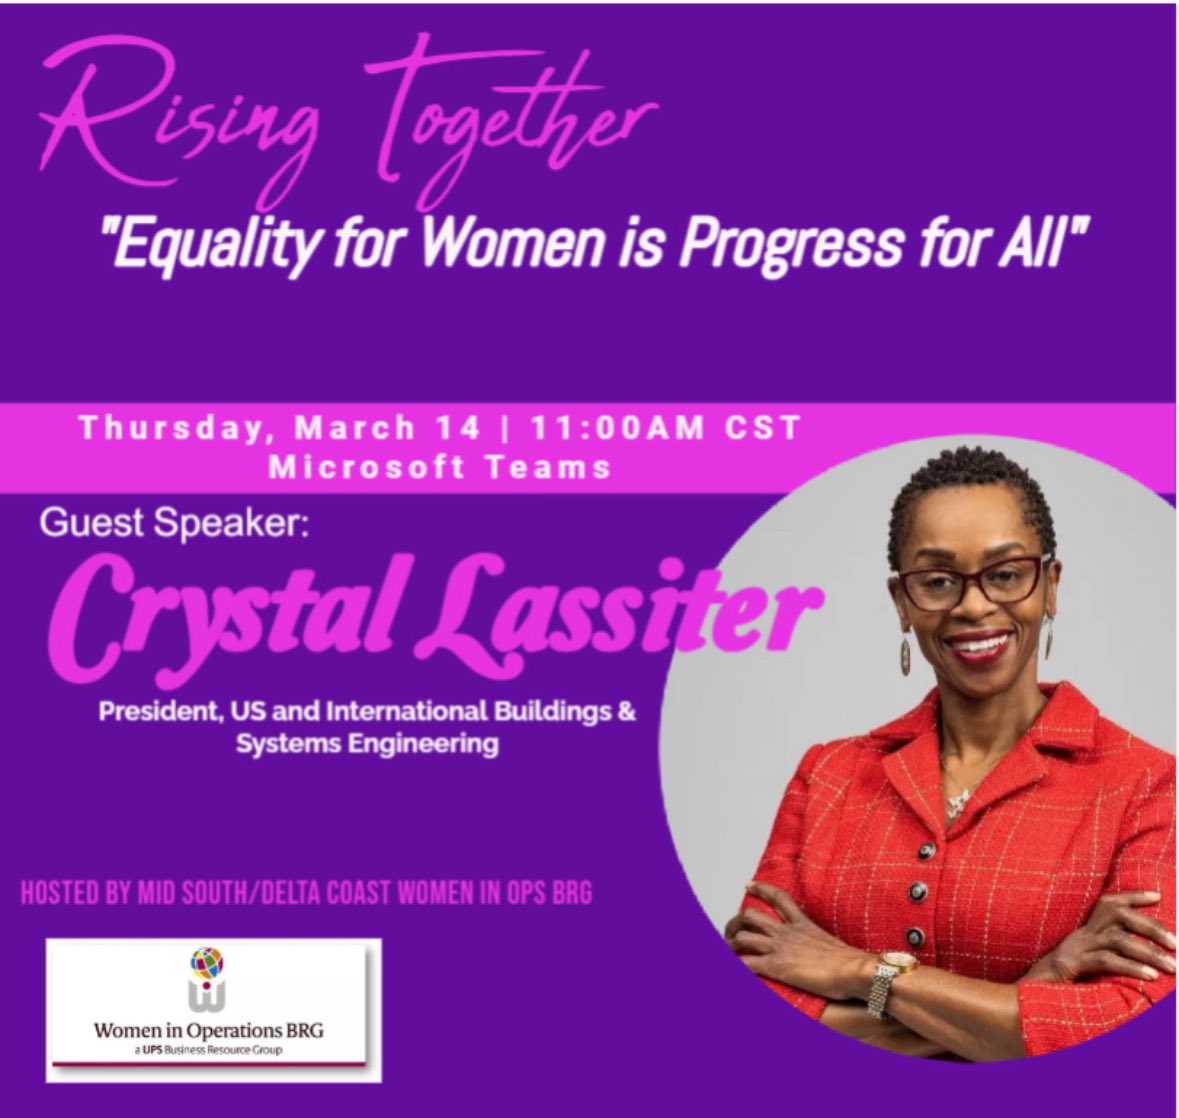 You're invited to Mid South and Delta Coast WIO BRG presents: Rising Together, 'Equality for Women is Progress for All' Thursday, March 14, 2024 11:00 am - 12:00 pm (CST) teams.microsoft.com/l/meetup-join/… Tap on the link or paste it in a browser to join.